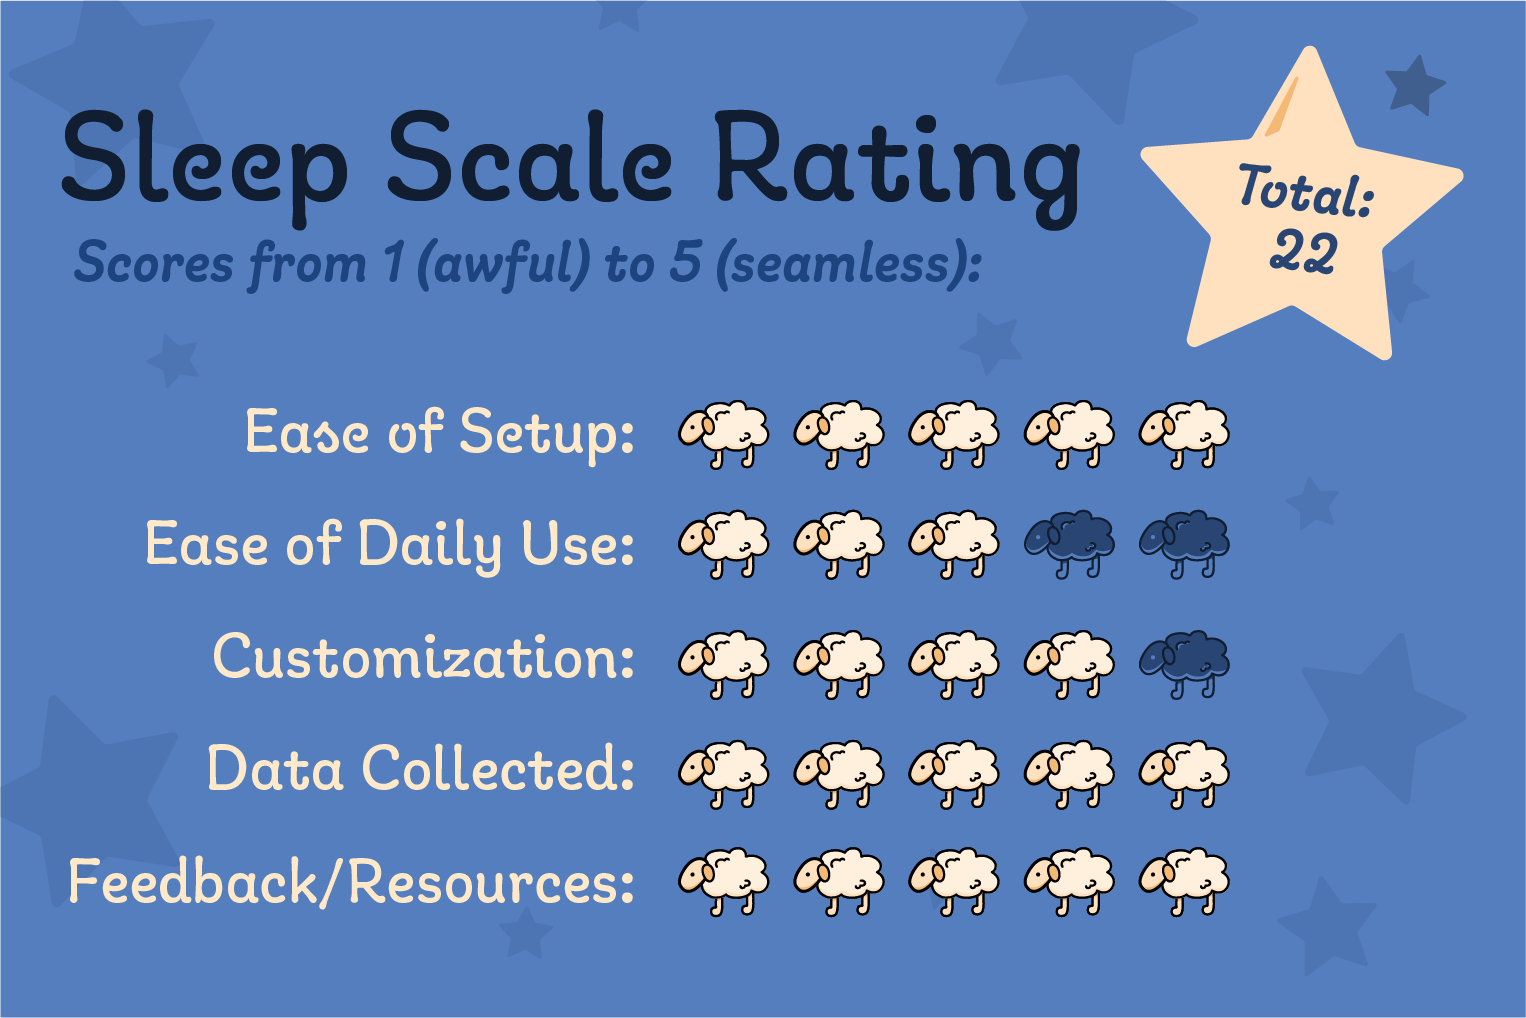 Scores from 1 (awful) to 5 (seamless):<br />
Ease of setup: 5<br />
Ease of daily use: 3<br />
Customization: 4<br />
Data collected: 5<br />
Feedback and resources: 5<br />
Total: 22